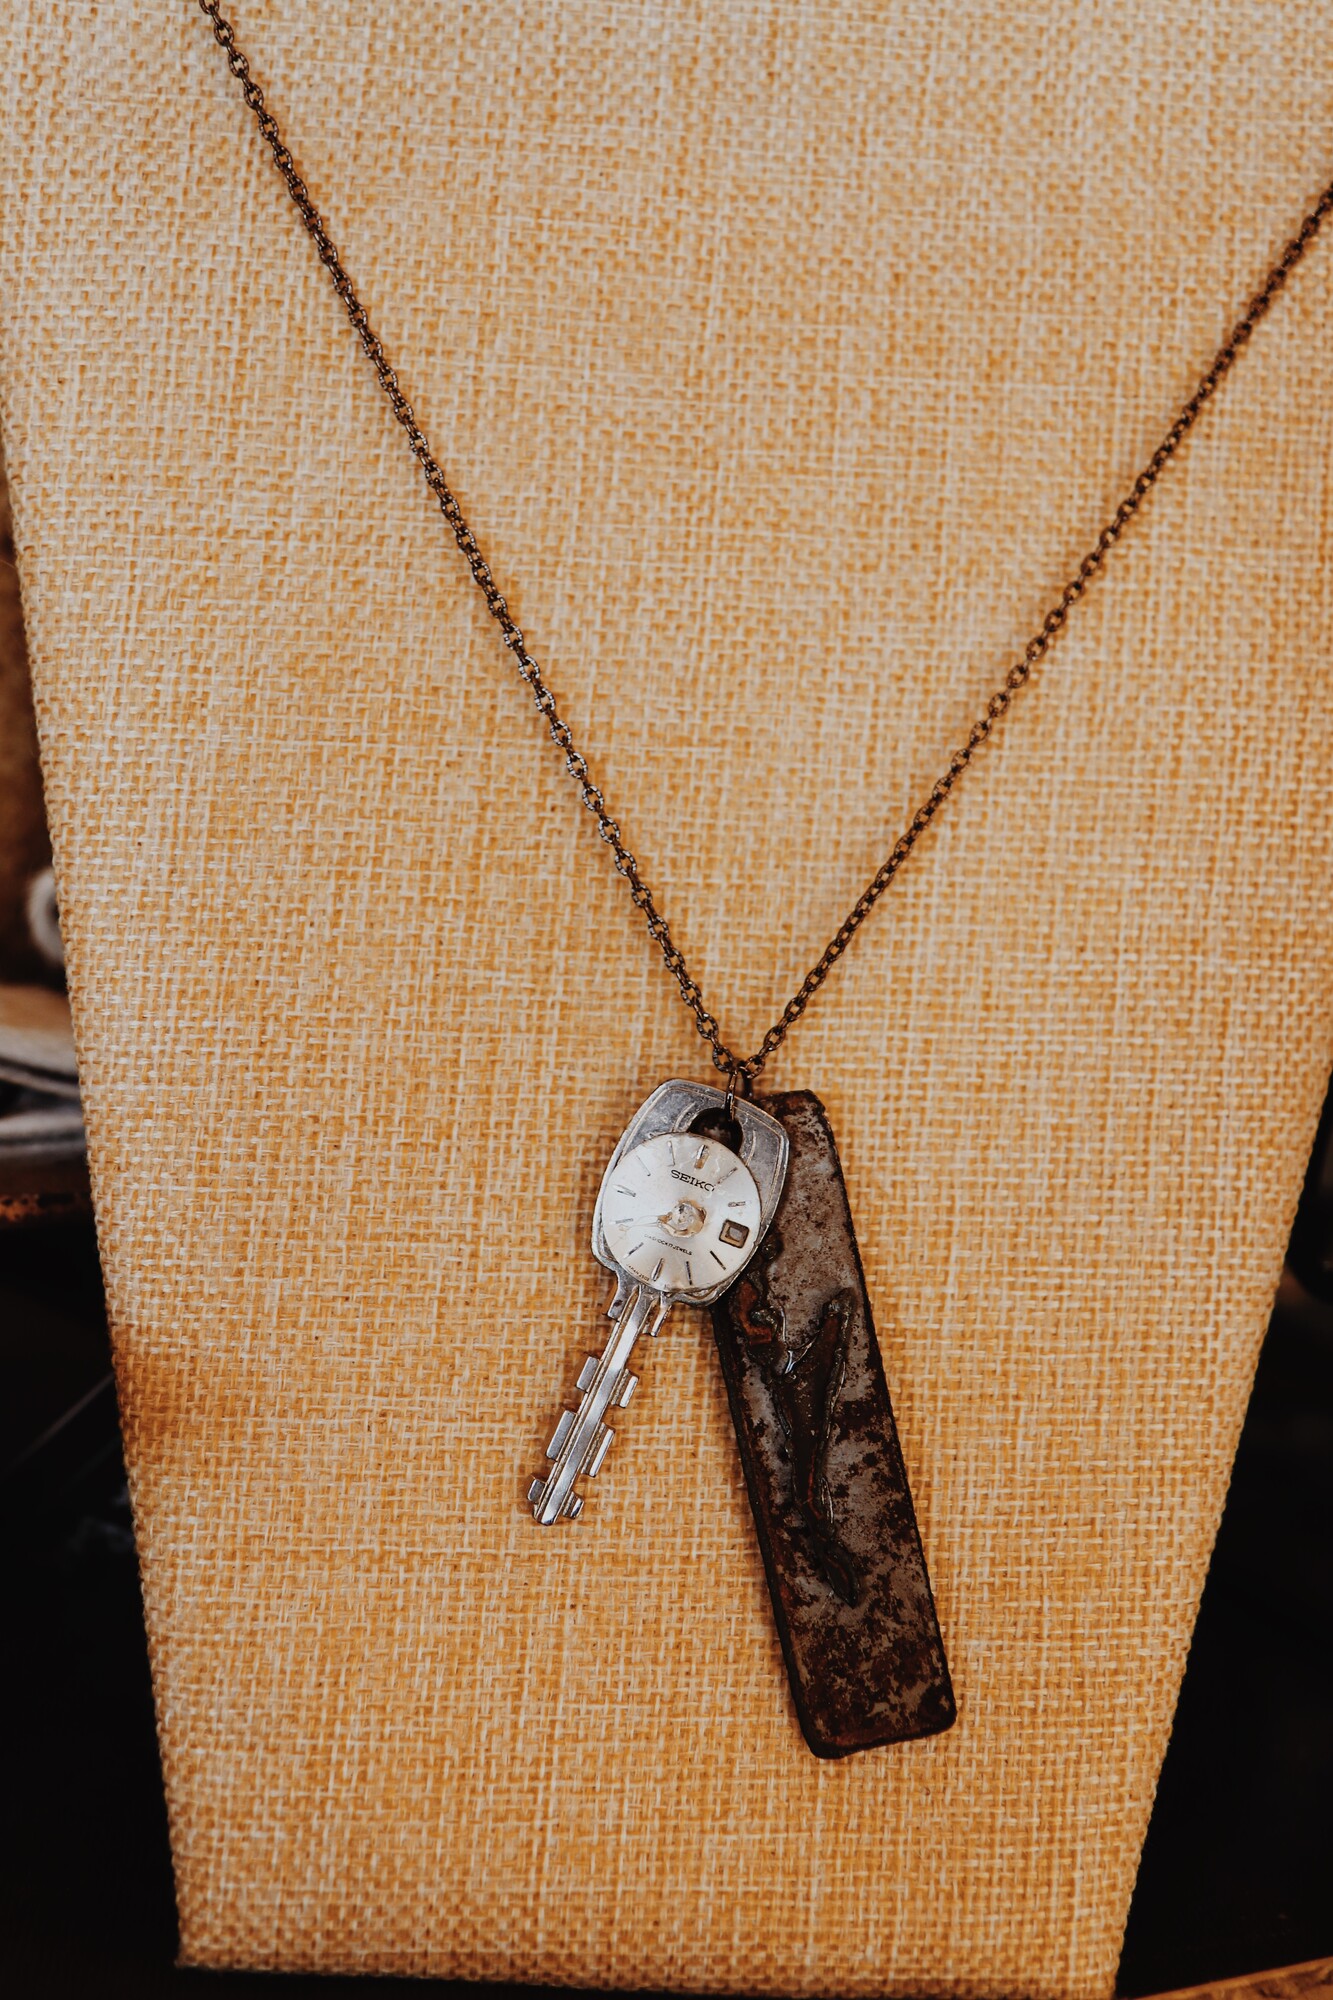 This necklace from Kelli Hawk Designs was handmade from vintage pieces! The centerpiece features two vintage metal pieces, one of which is an old key with a watch face attached. This hangs on a 23 inch chain.